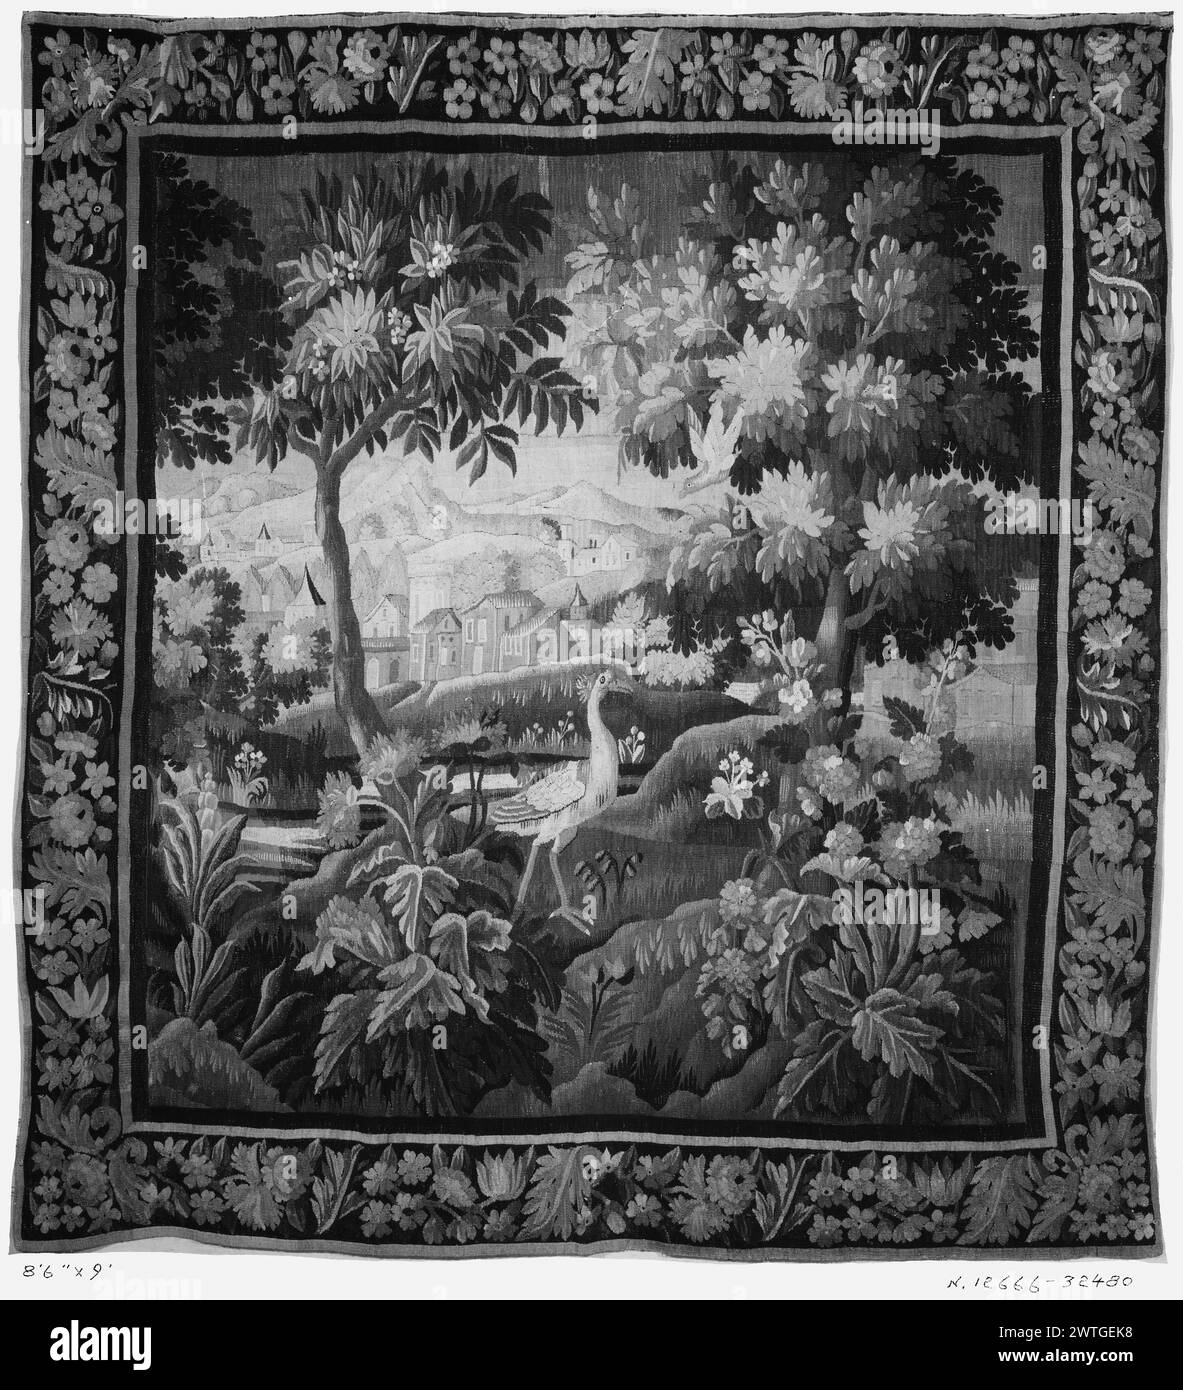 Landscape with large bird. unknown c. 1700-1740 Tapestry Dimensions: H 9' x W 8'6' Tapestry Materials/Techniques: unknown Culture: French Weaving Center: Aubusson Ownership History: French & Co. purchased from Mrs. W. T. Hoops, invoiced 8/20/1928; sold to Mrs. A. B. Spreckels 8/19/1930 [SS 32480]. French & Co. received from Mr. R. Walsh, invoiced 3/12/1932; returned 10/5/1932 [ss 17546]. Bird in center amongst wild flowers, plants & trees; river flows, leading to town on opposite bank; additional buildings on nearby hills in distance (BRD) border with spiraling acanthus leaves & floral decorat Stock Photo